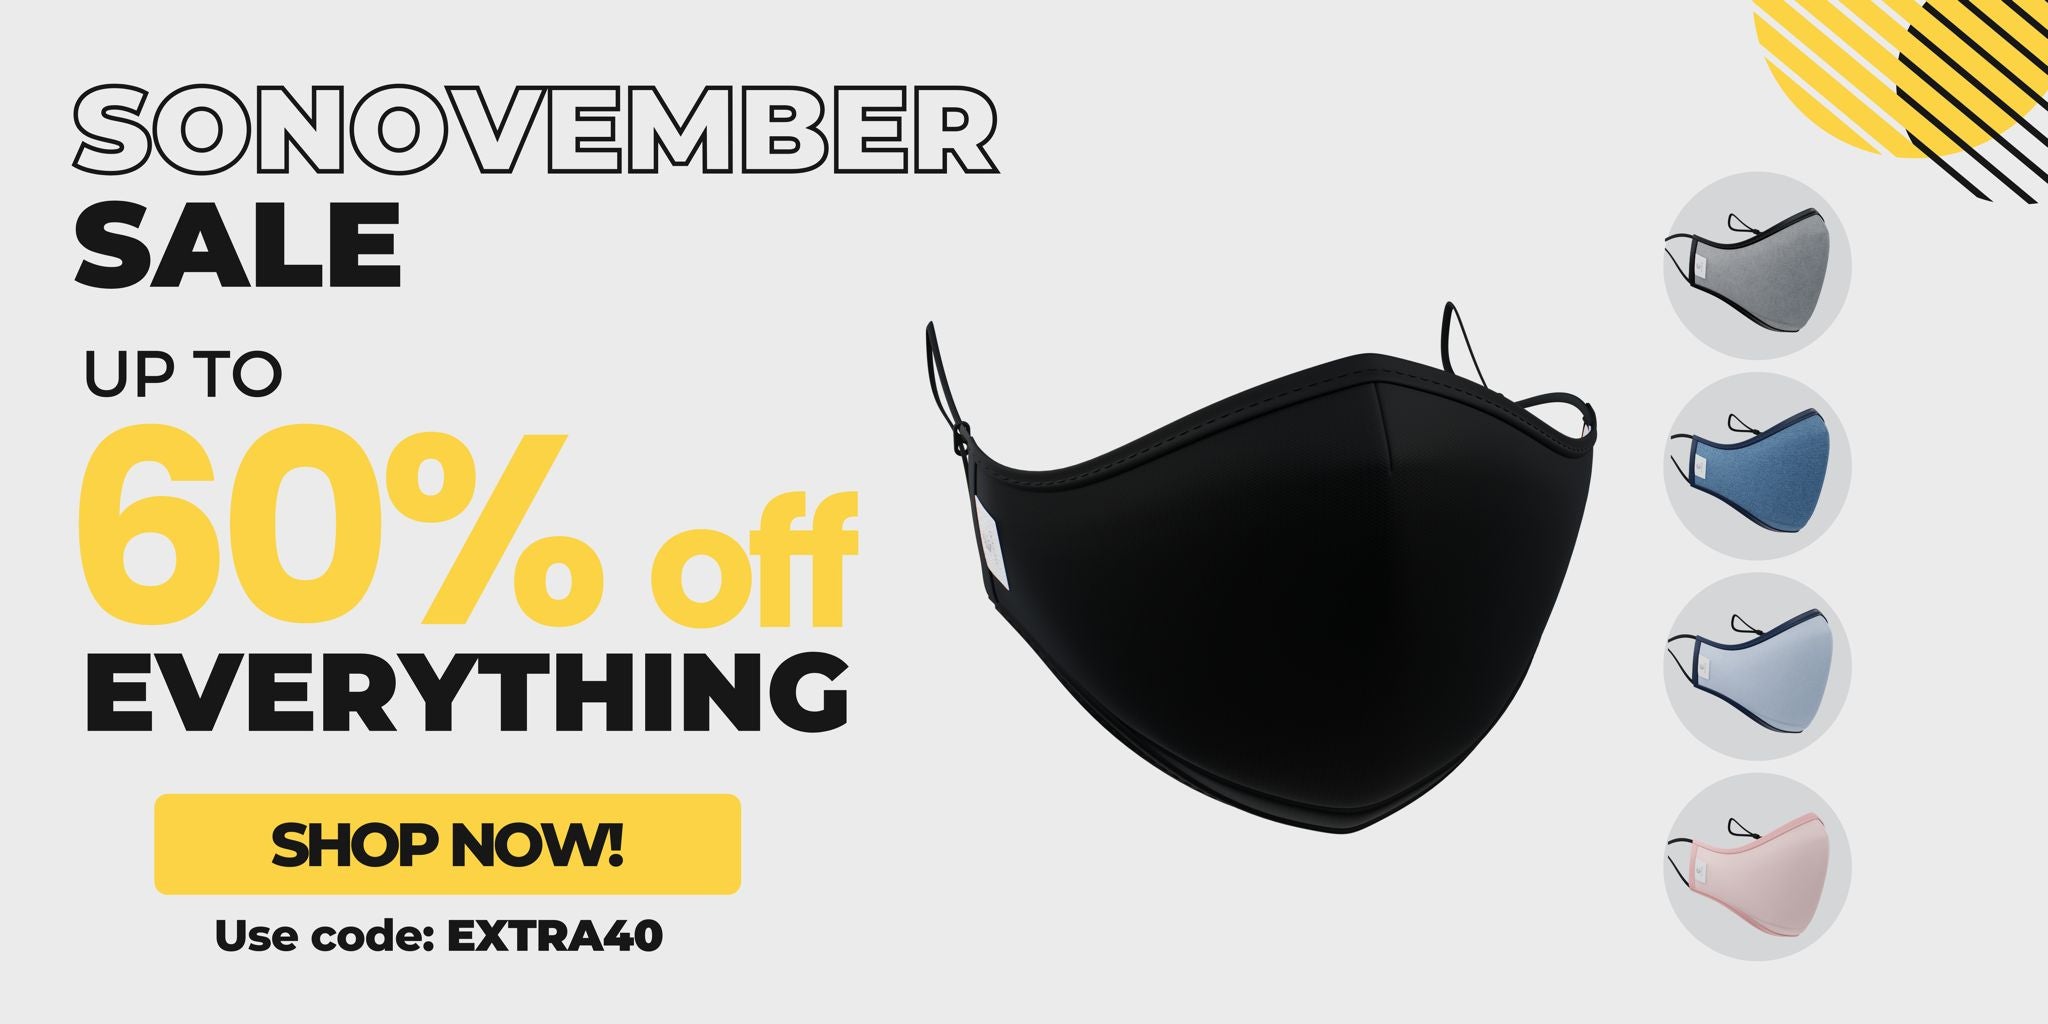 UP TO 60% EVERYTHING - use code: EXTRA40